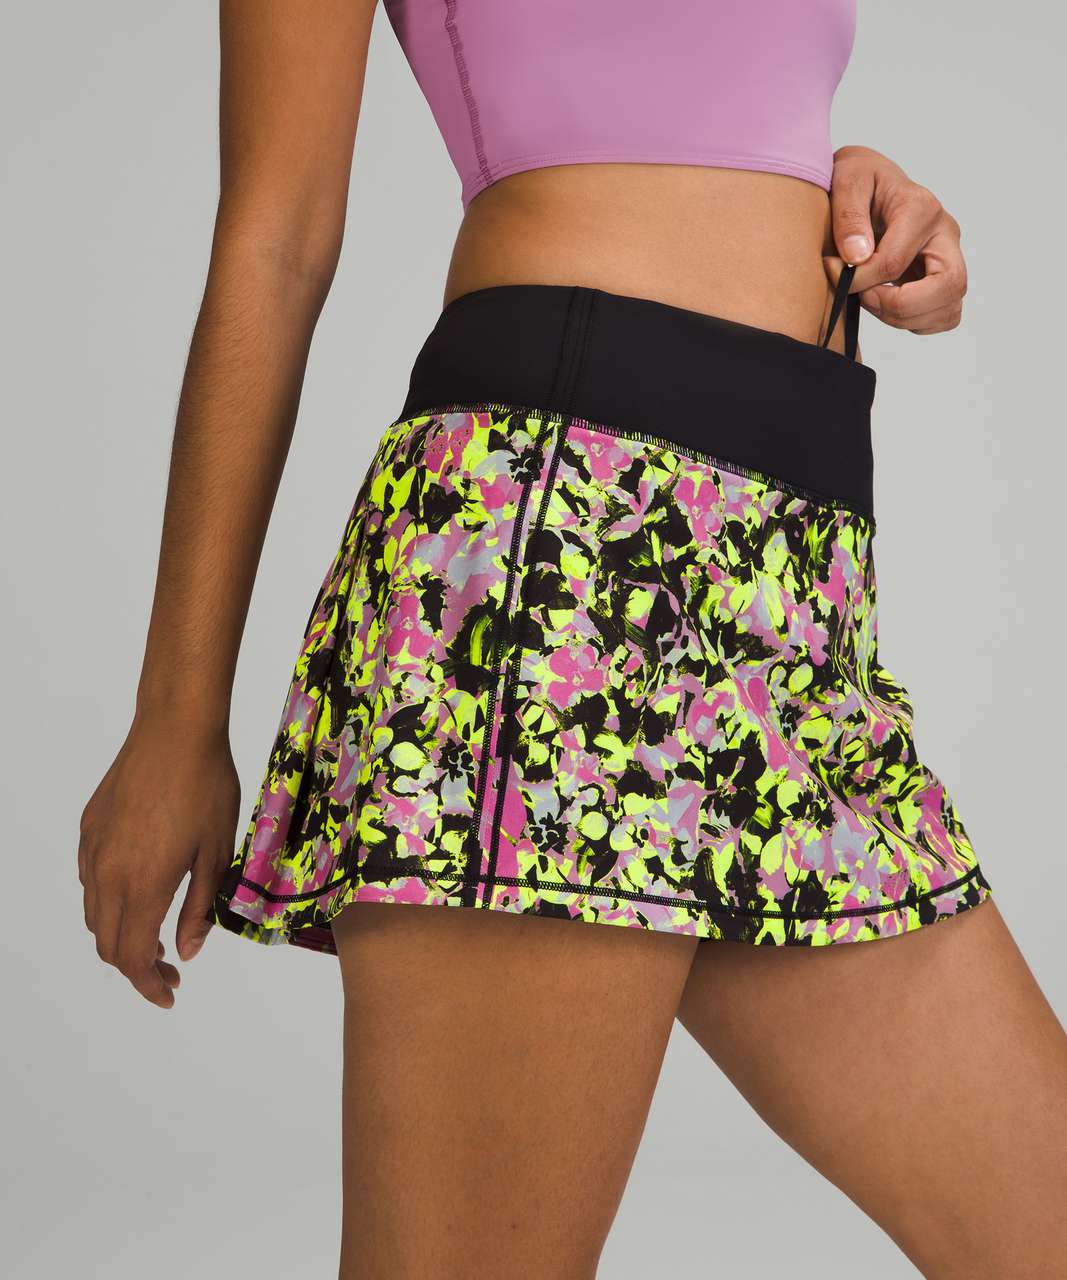 Lululemon Pace Rival Mid-Rise Skirt - Inflected Highlight Yellow Multi / Black